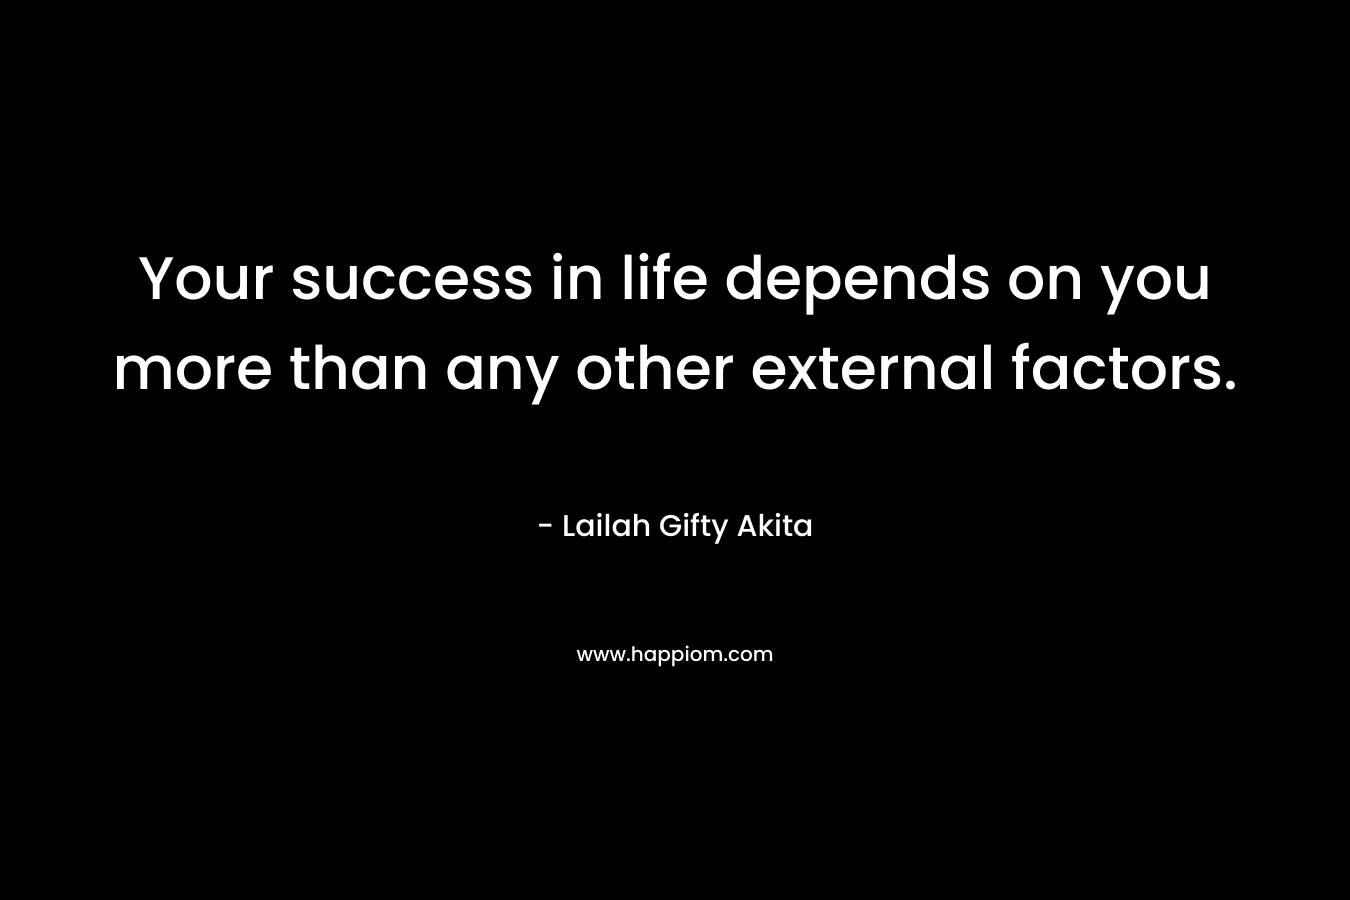 Your success in life depends on you more than any other external factors. – Lailah Gifty Akita